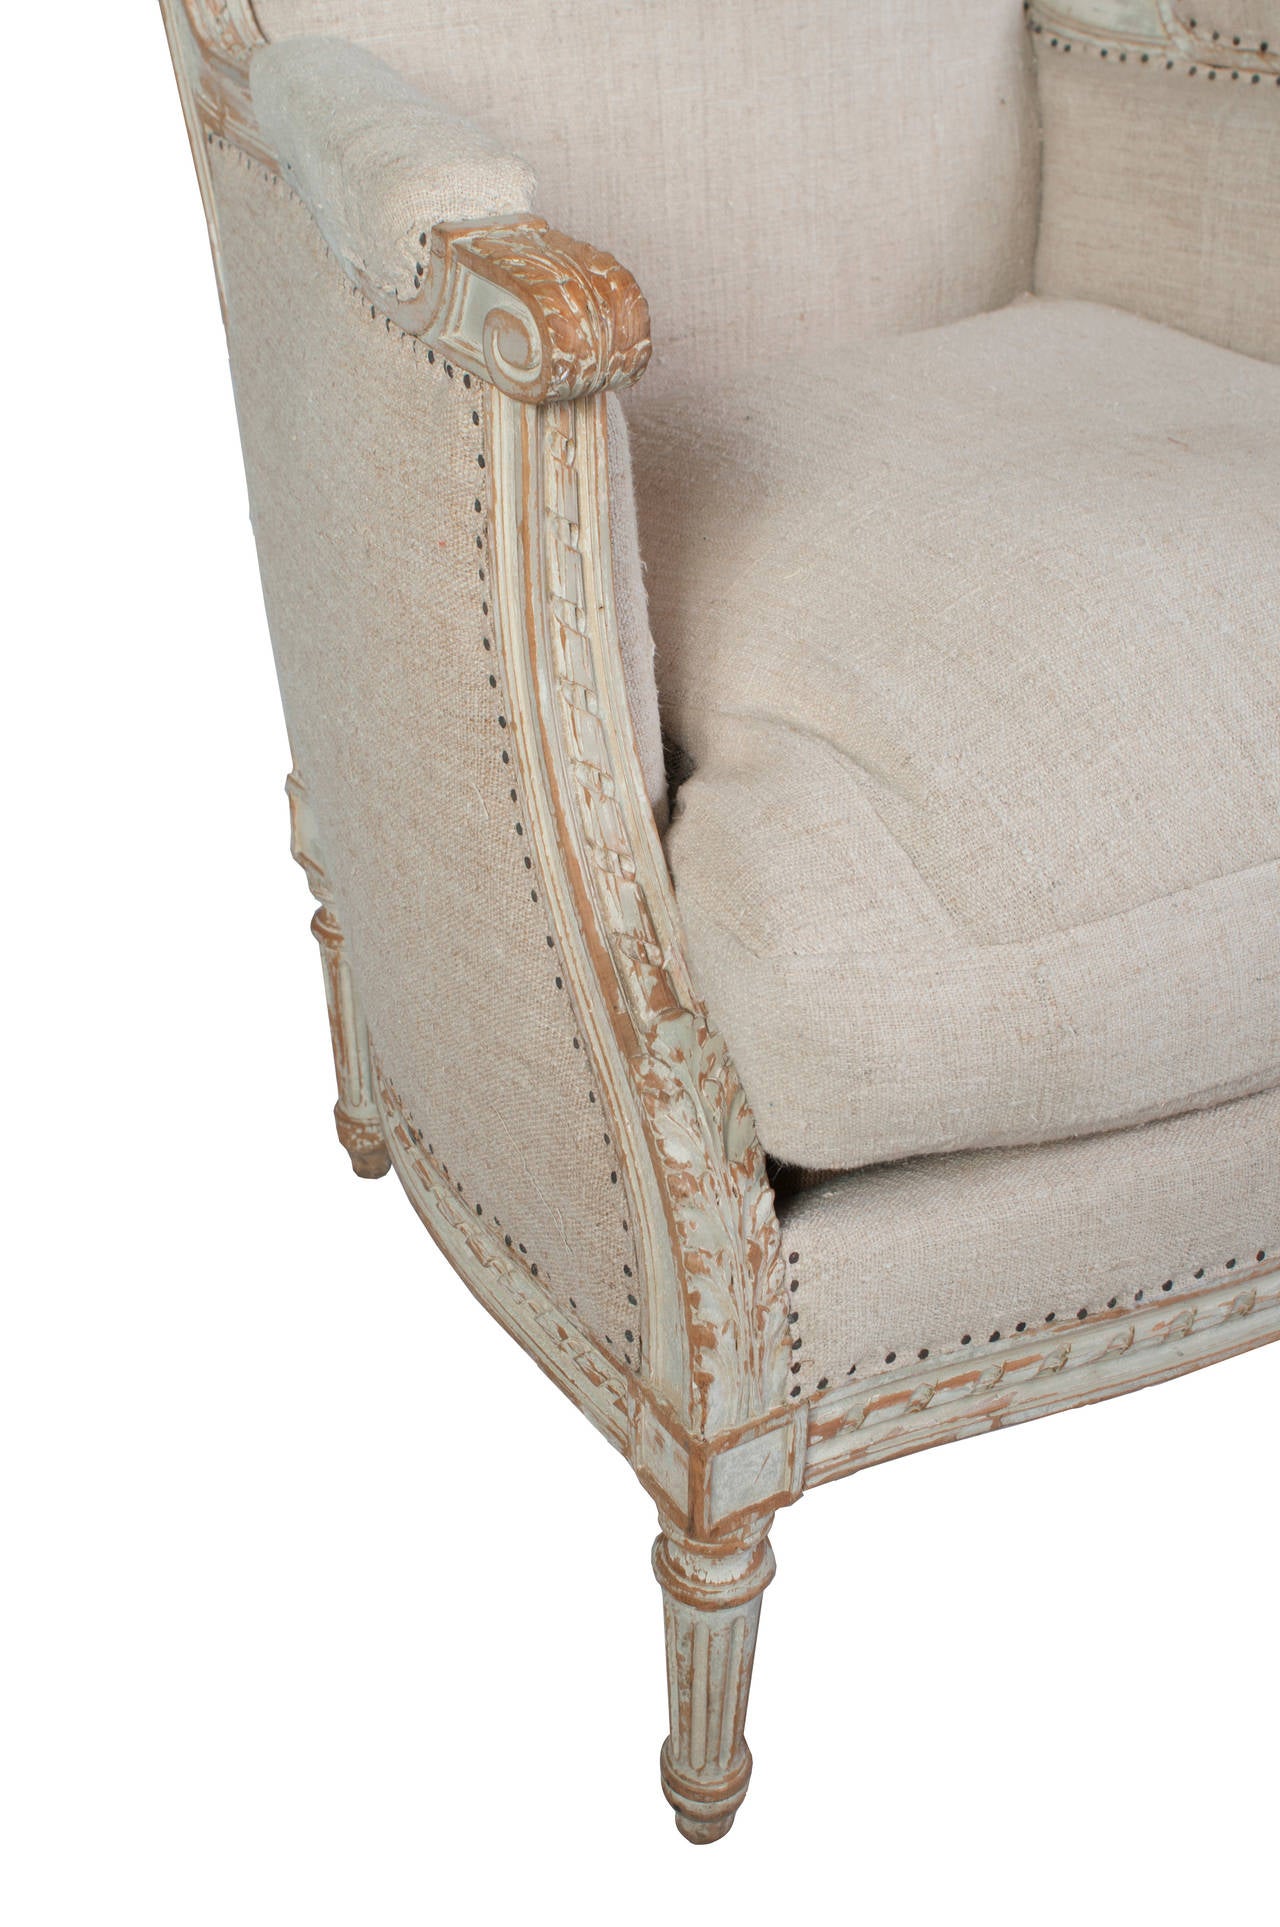 A Louis XVI grand bergere with a round bac.